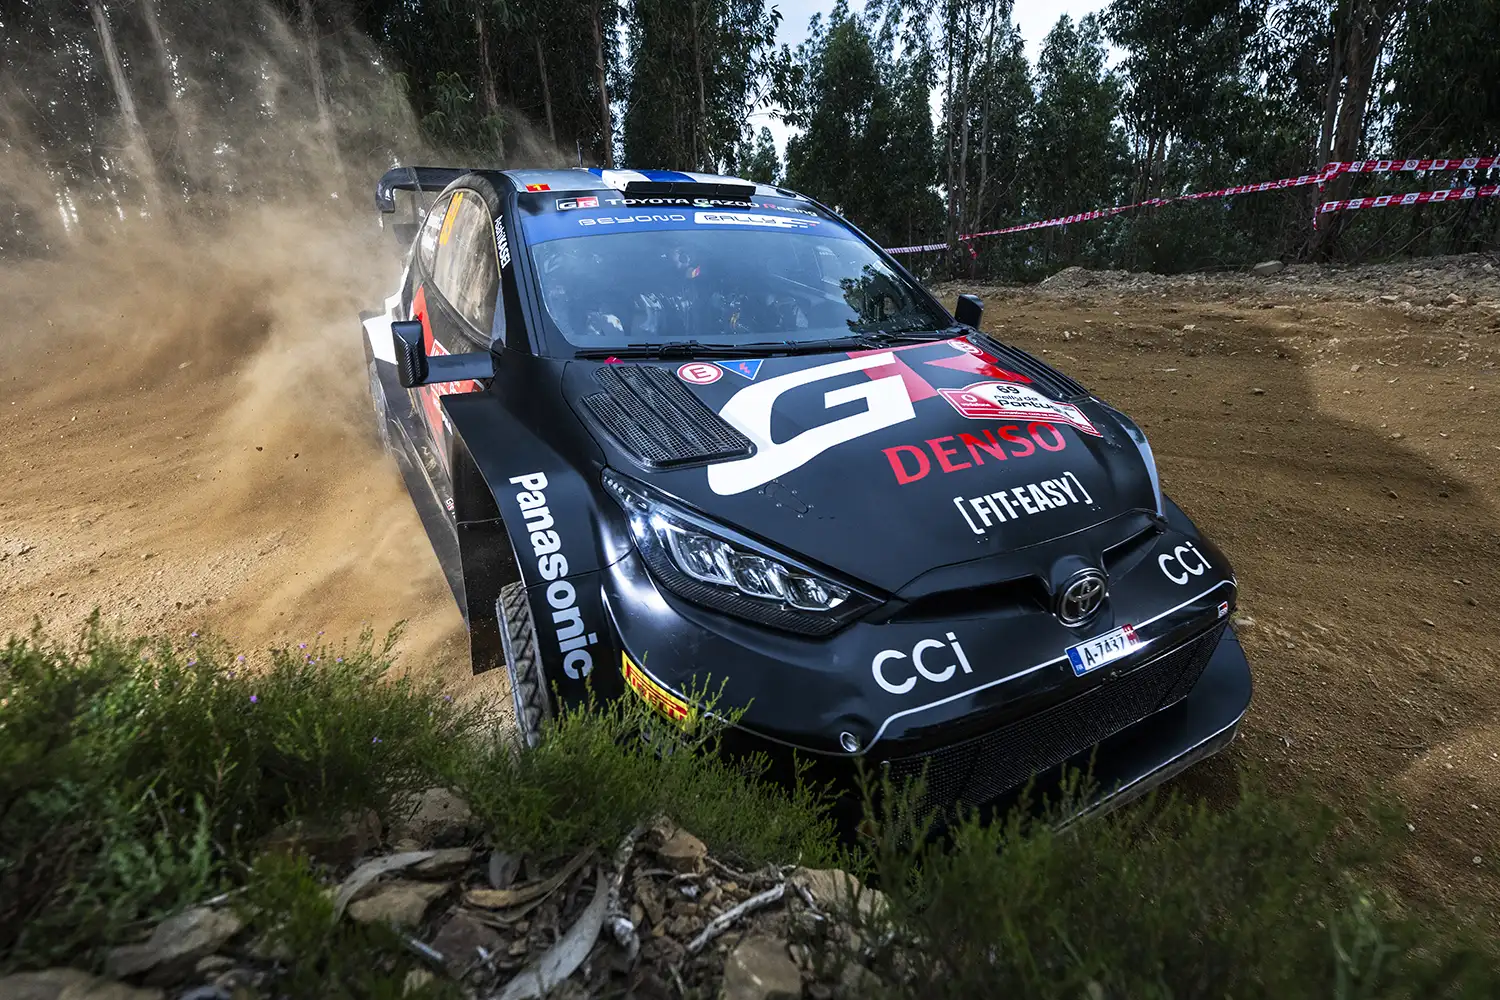 WRC – Rovanperä swoops to Friday lead in Rally de Portugal thriller